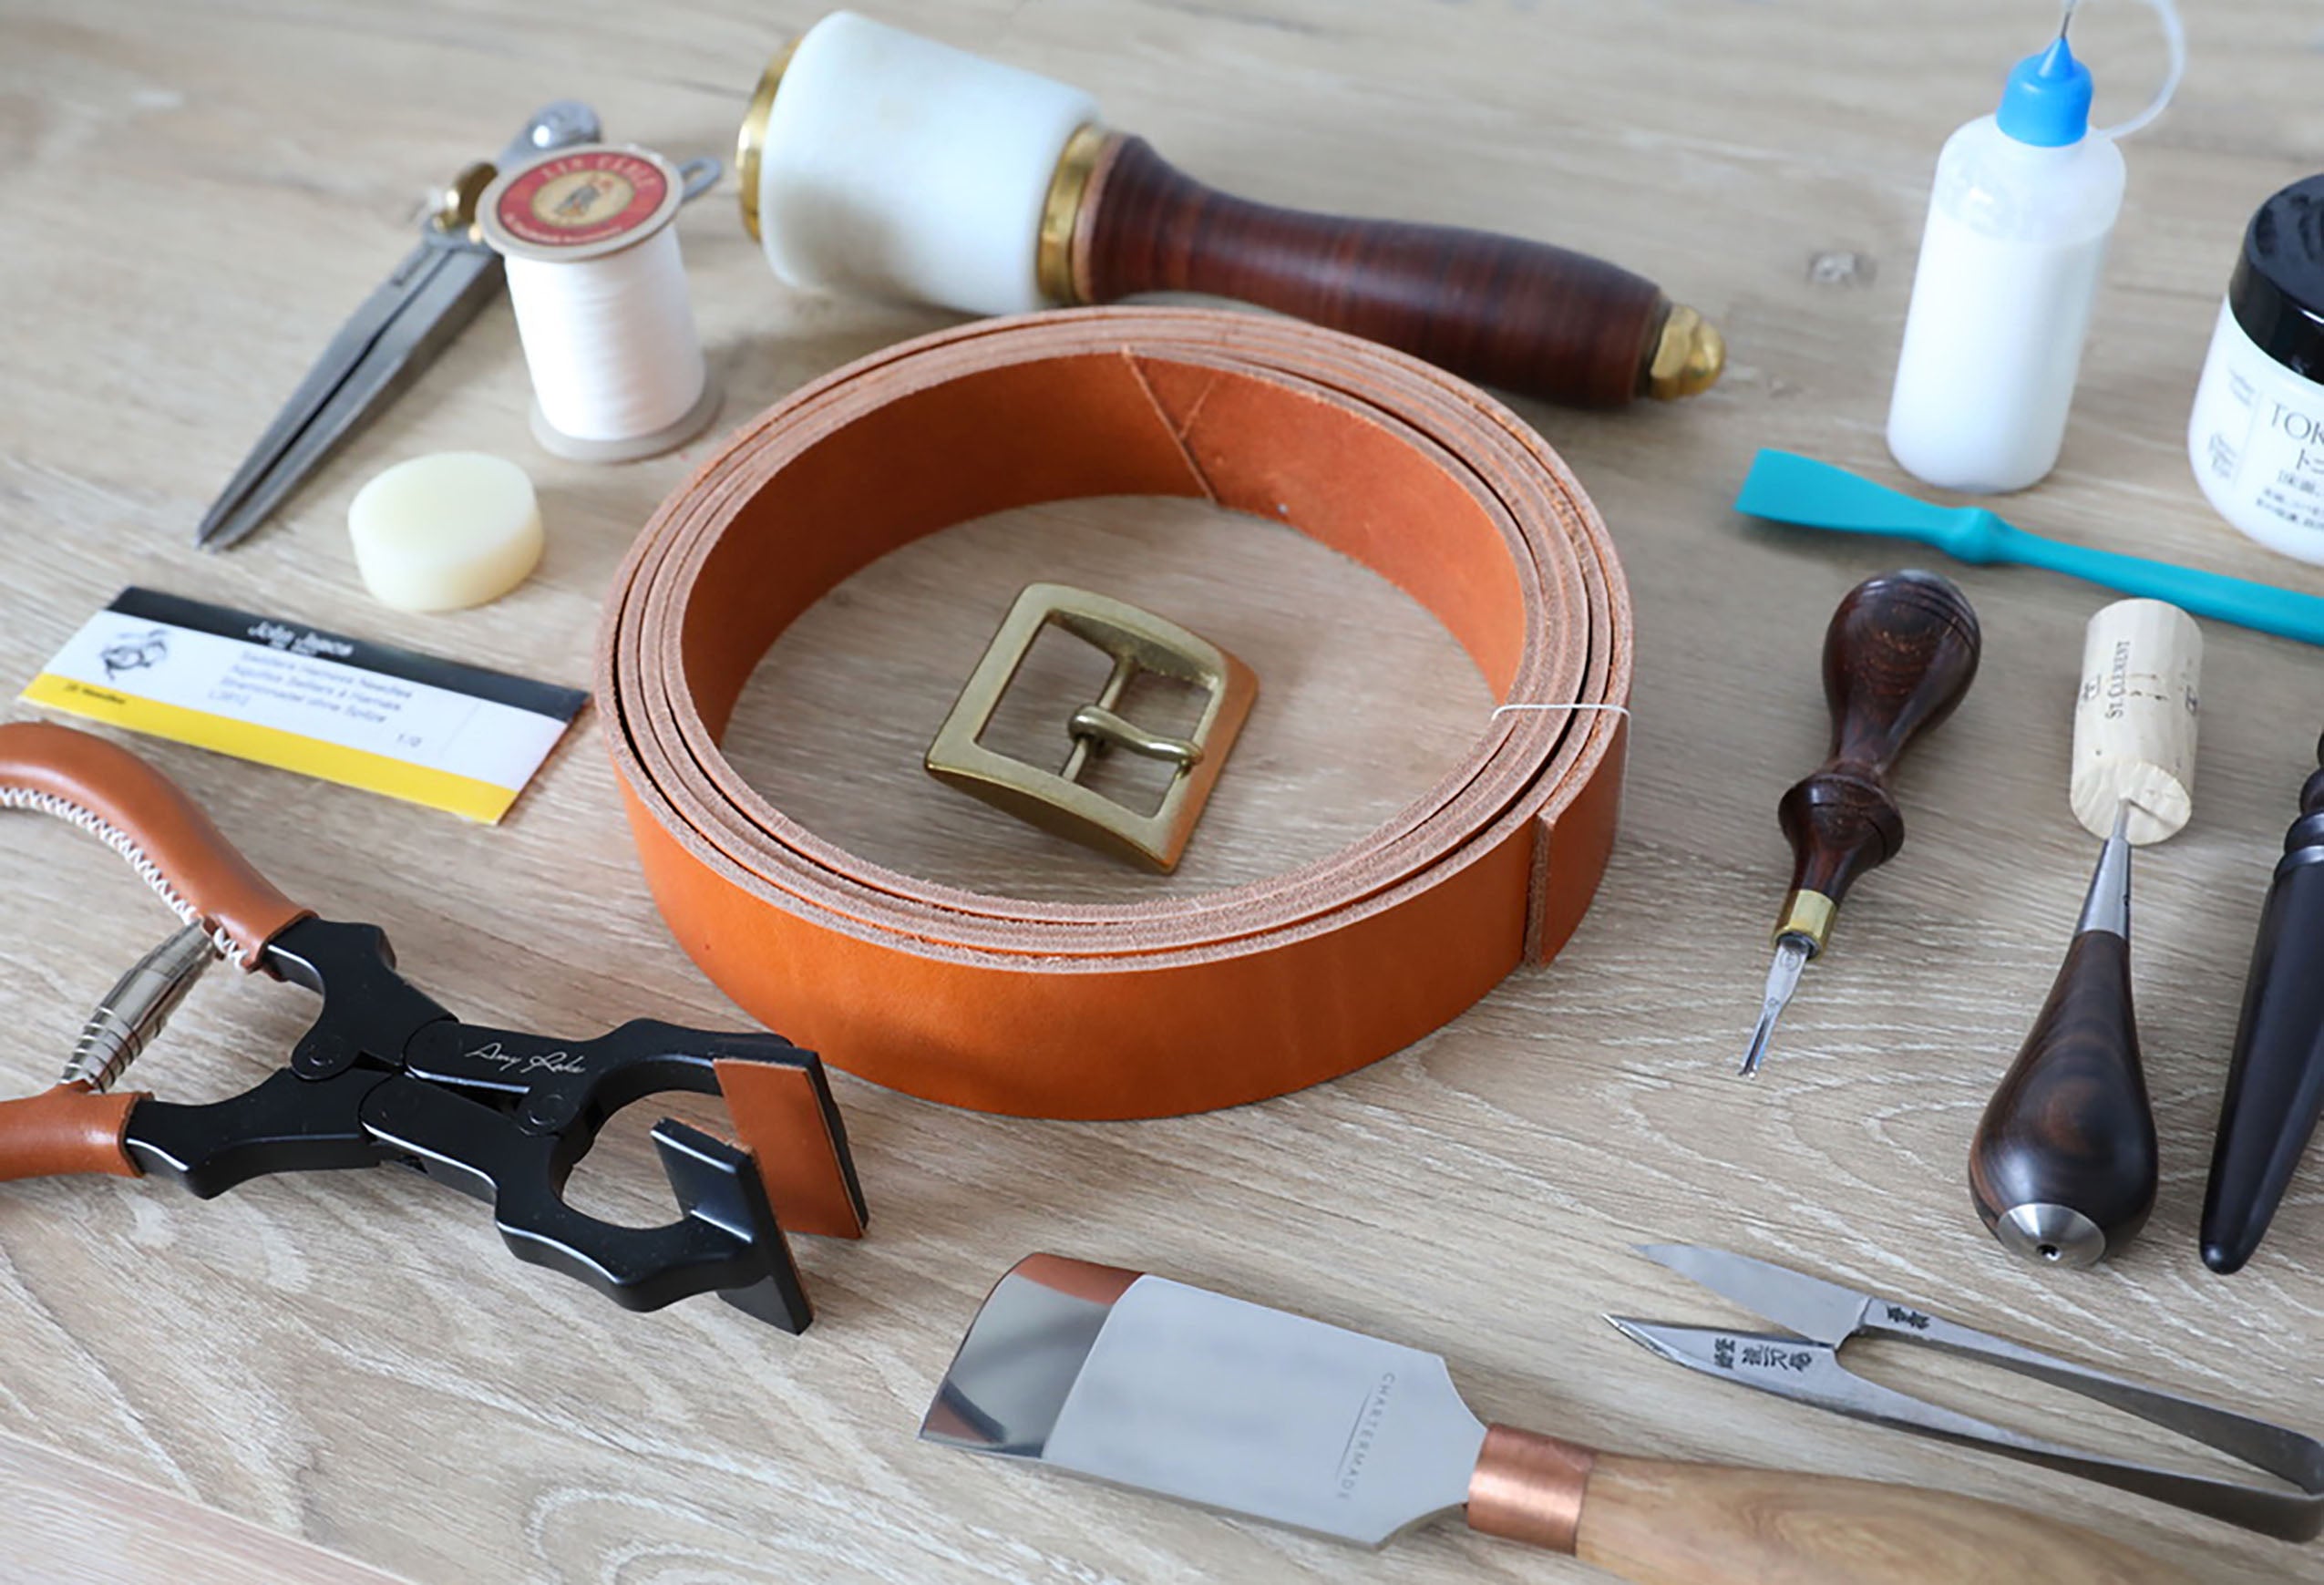 Leather Tooling Kit - Weaver Leather Supply  Leather working tools,  Leather supplies, Leather craft